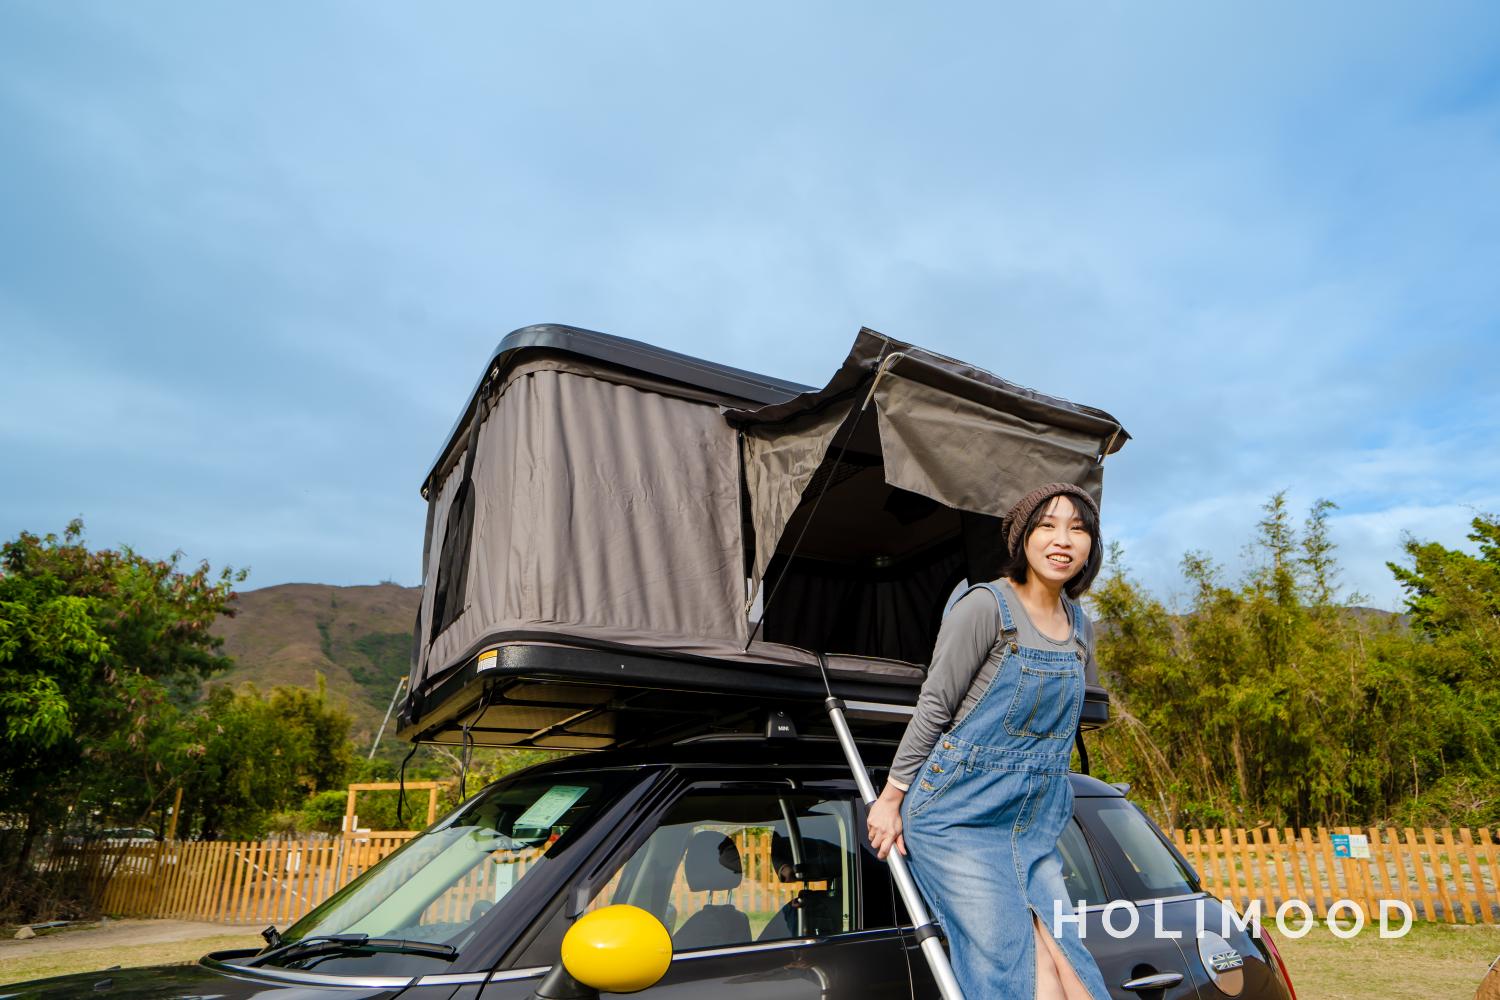 DNA 租車 【Girl Dream Car】Mini Cooper Countryman Roof Camping and Car Camping Experience 7